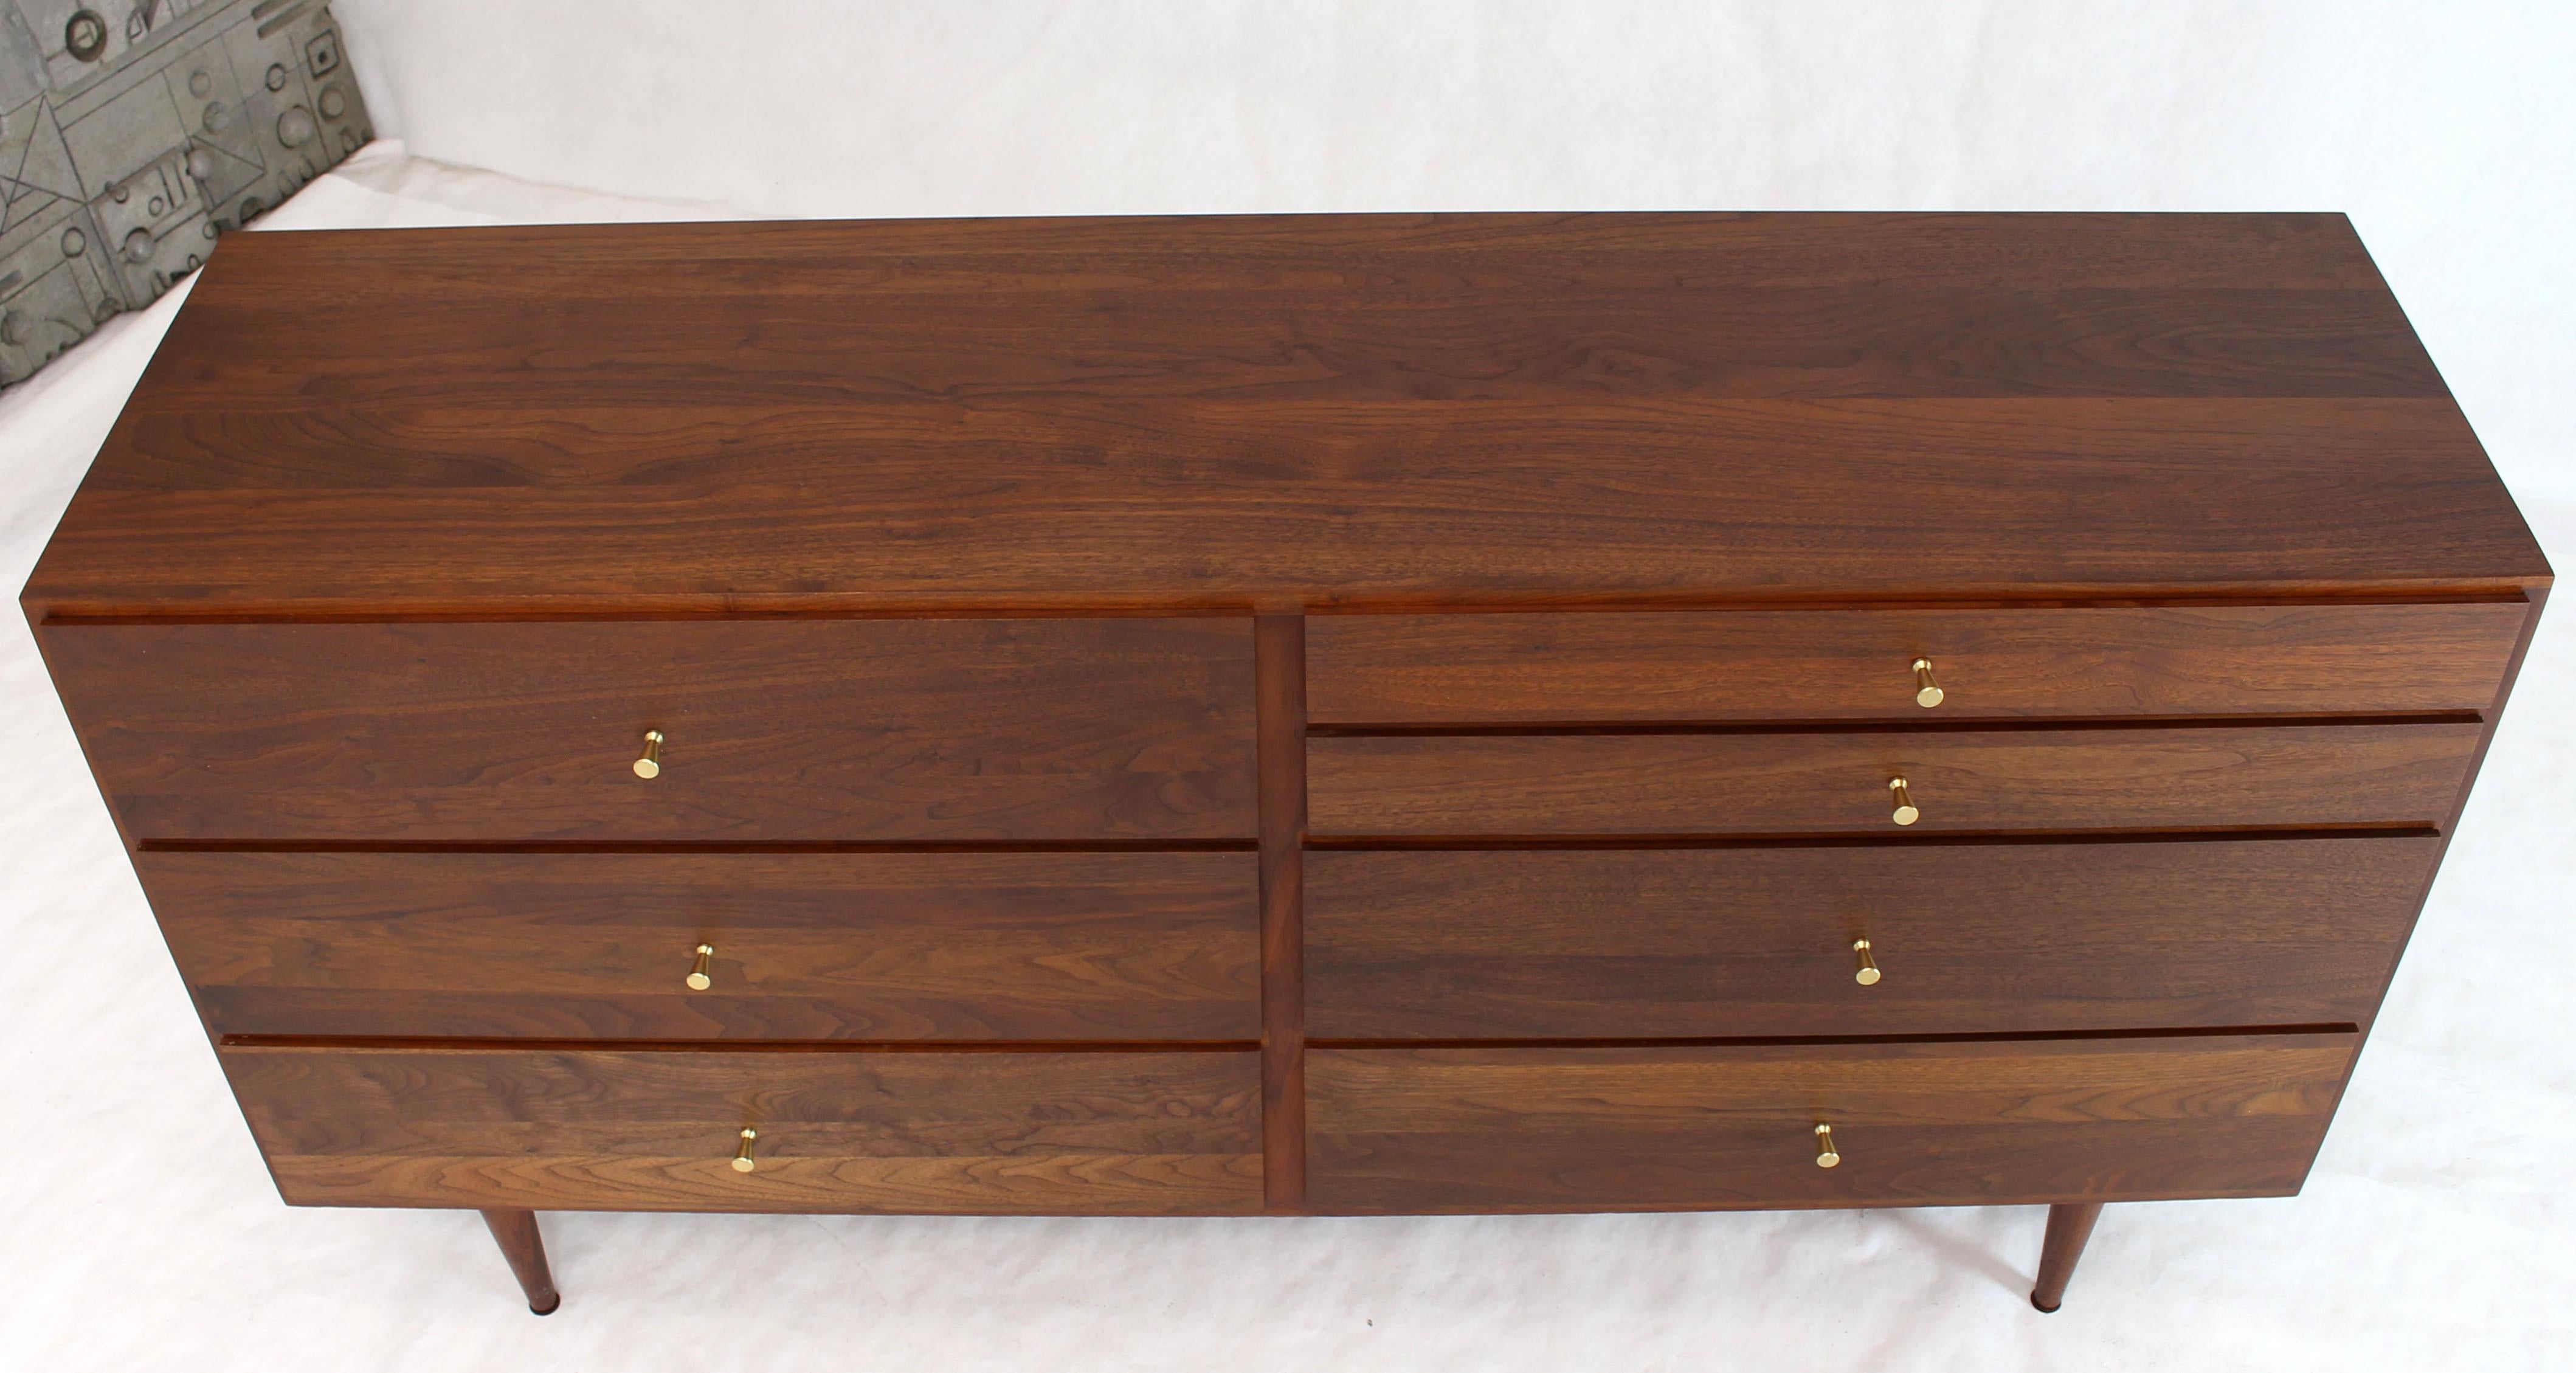 Solid Oiled Walnut Seven Drawers Double Dresser Brass Pulls Tapered Legs 5